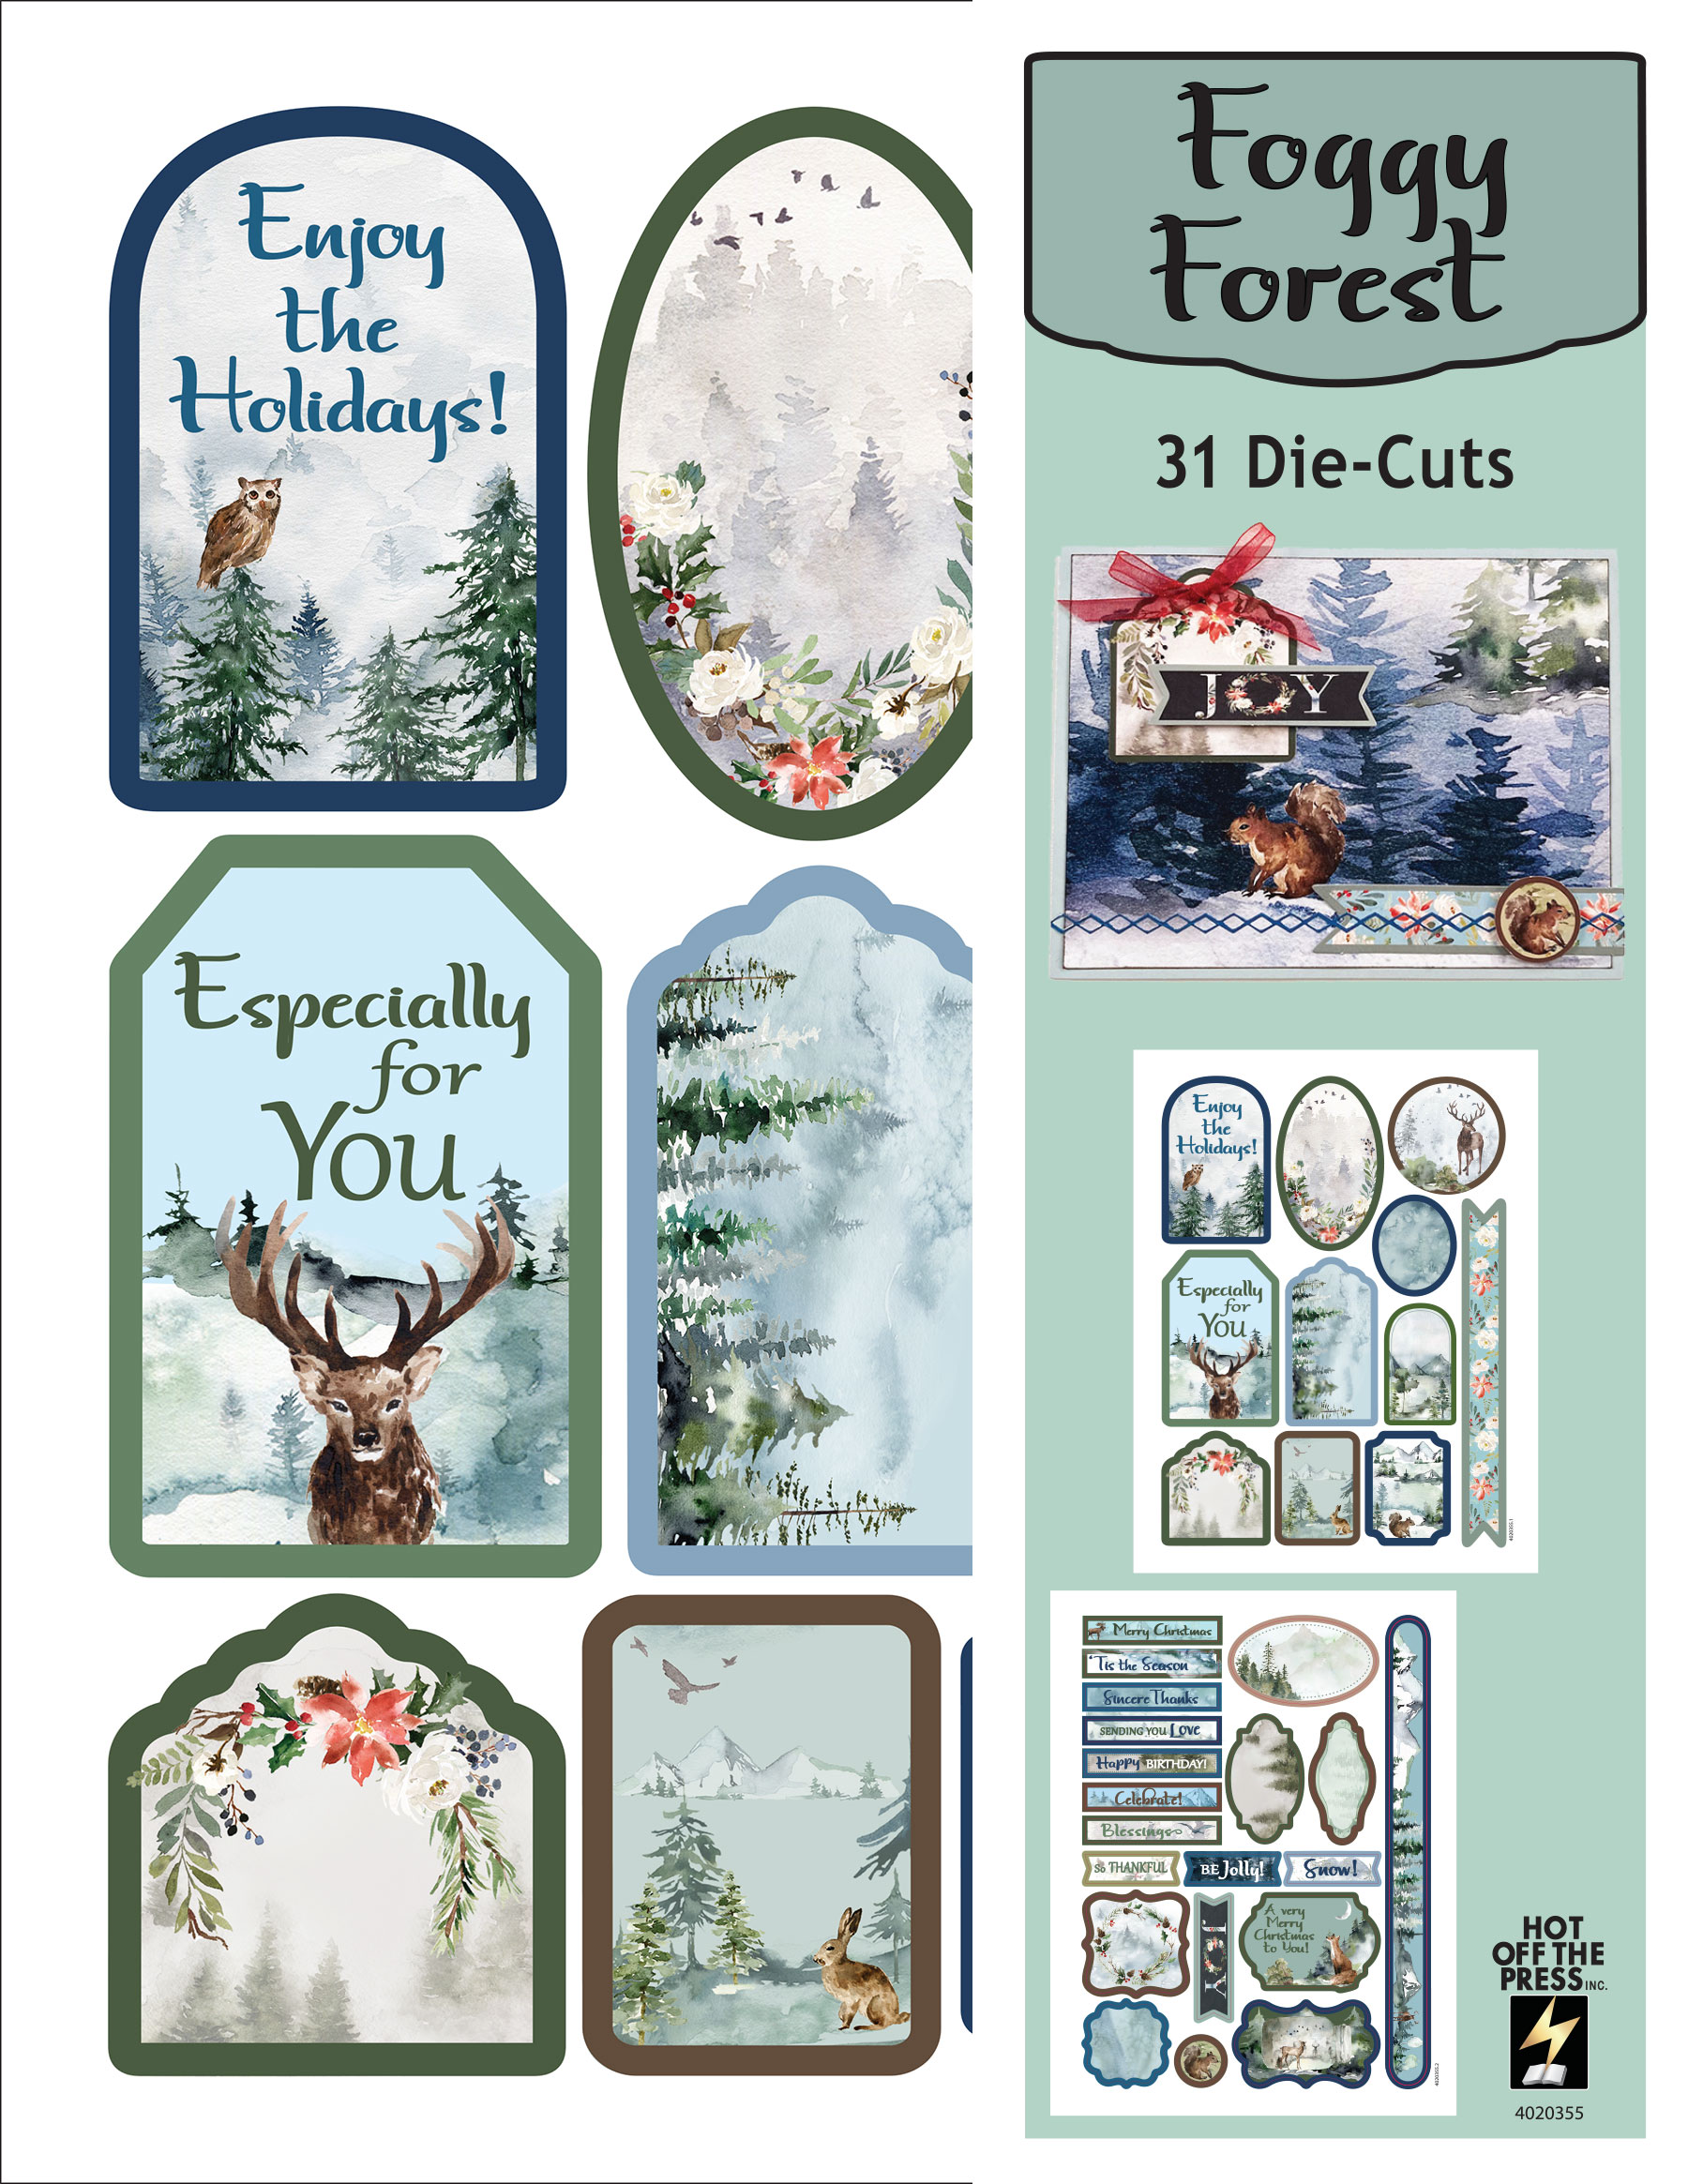 Foggy Forest Die-Cuts